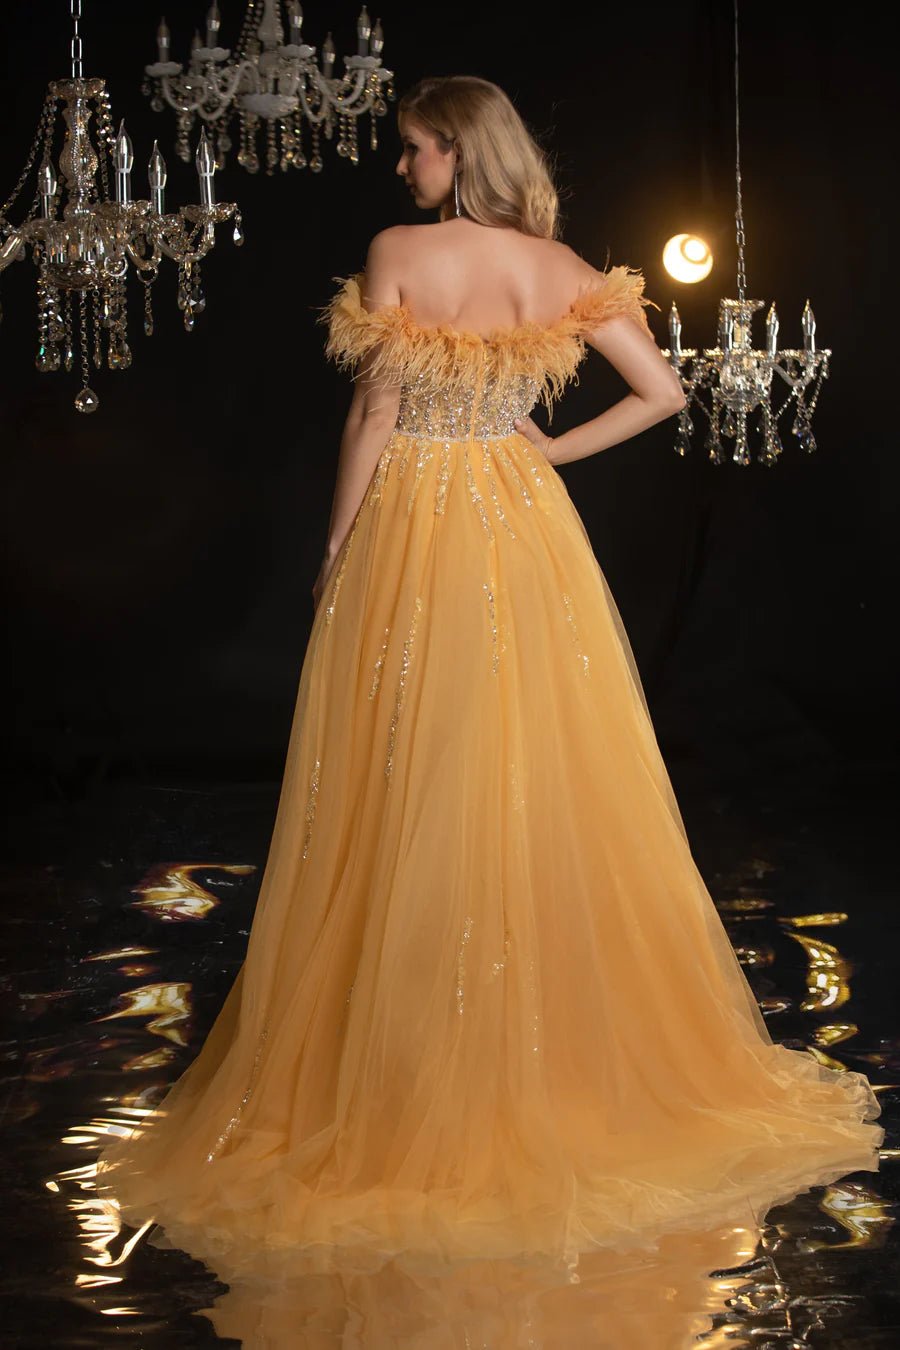 Elegant Yellow Sequin Evening Gown with Feather Off-Shoulder Design - Designer Sequin Gown and Sequin and Feather Dress Plus Size - WonderlandByLilian